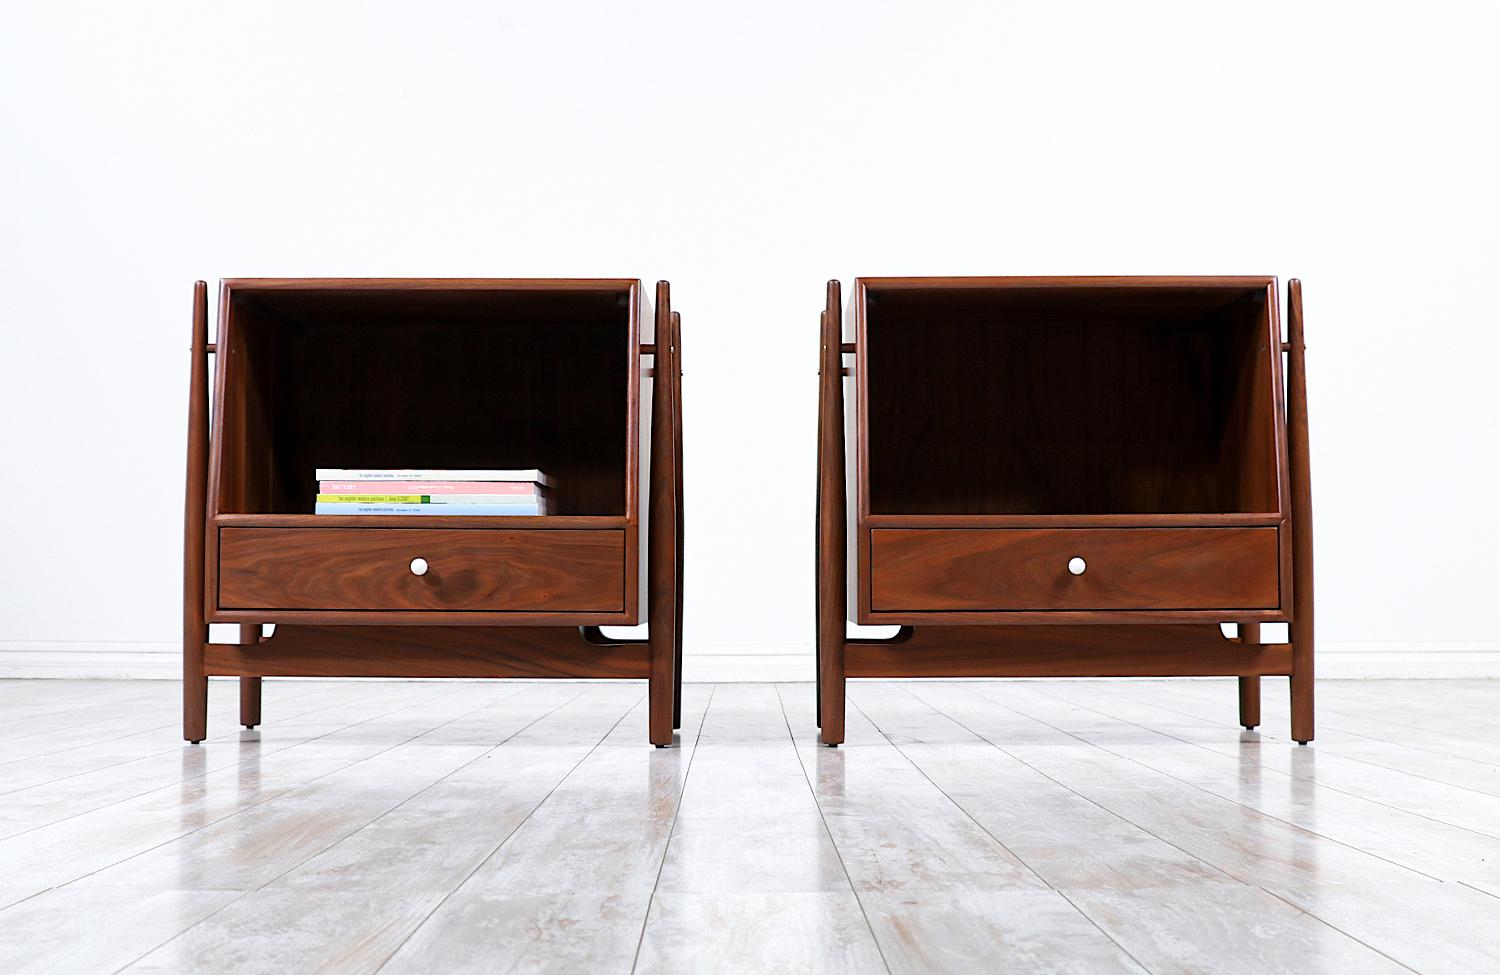 A pair of Mid-Century Modern night stands designed by Kipp Stewart & Stewart MacDougall for Drexel’s ‘Declaration’ line in the United States circa 1960s. Drexel’s ‘Declaration’ iconic collection shows minimalist expressions and a straightforward